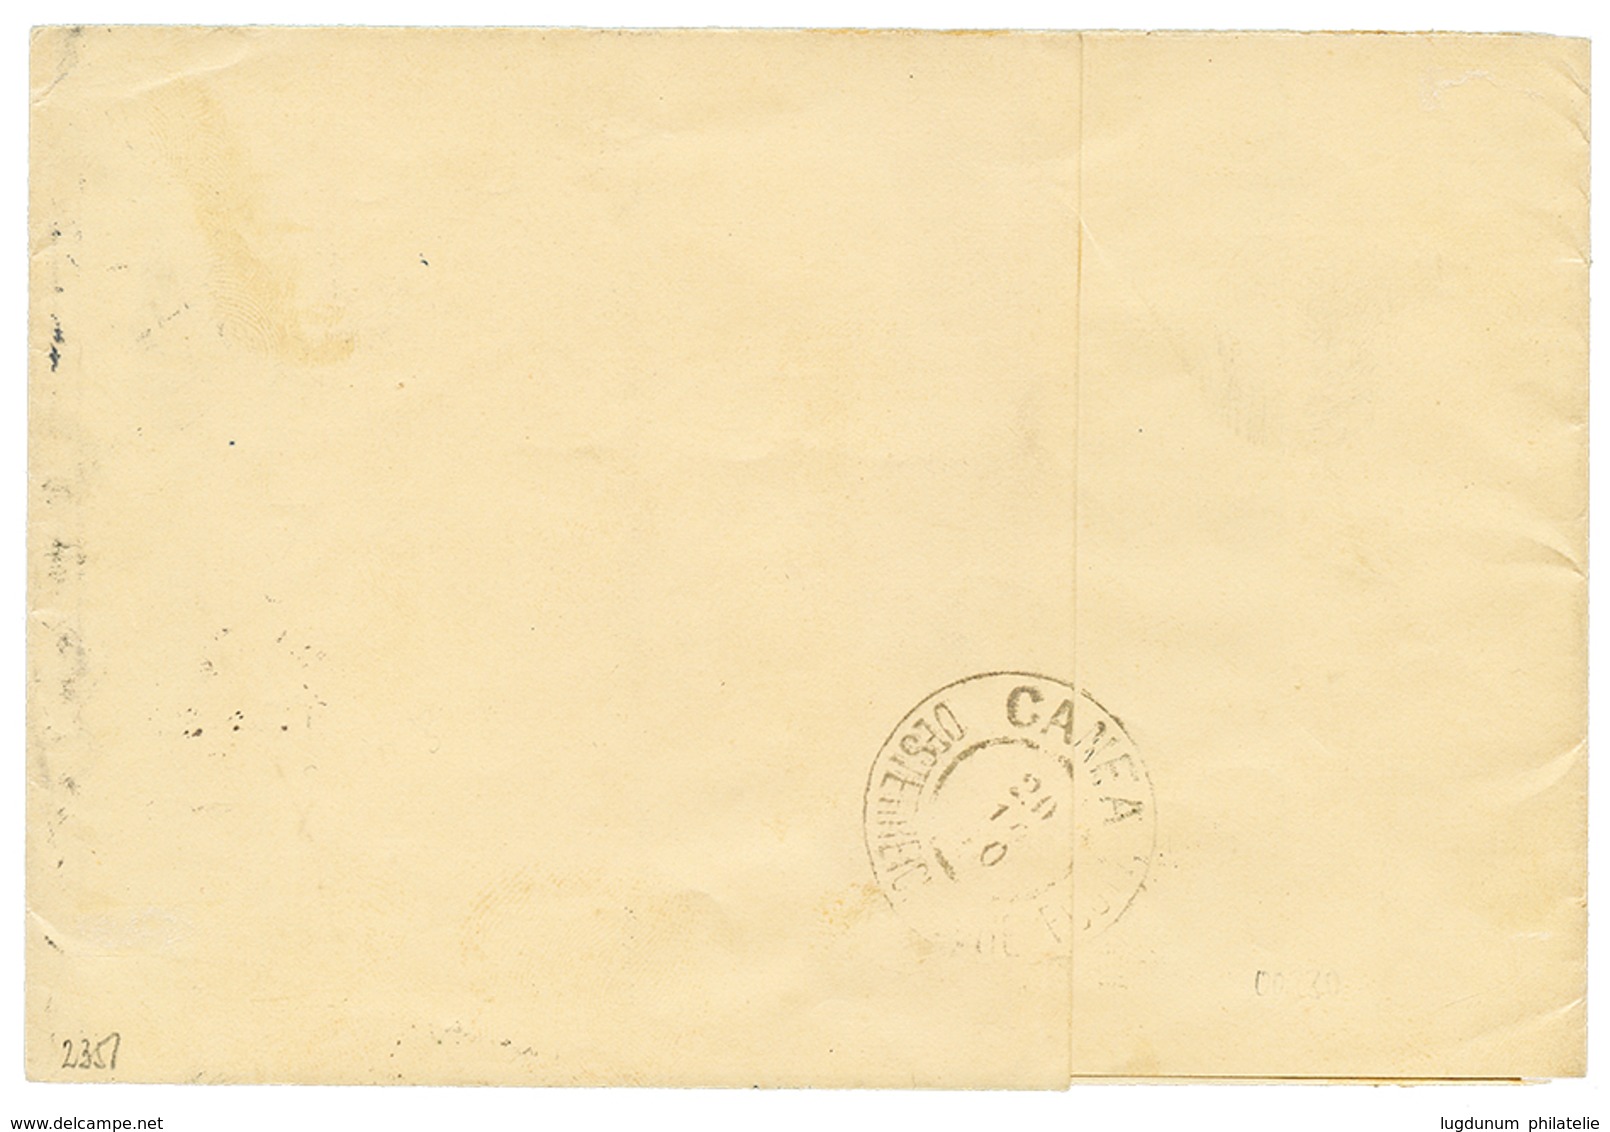 CANEA : 1910 GERMANIA 3pf Canc. BERLIN On Complete Wrapper (DRUCKSACHE) To CANEA Taxed On Arrival With CRETE 5l POSTAGE  - Levant Autrichien